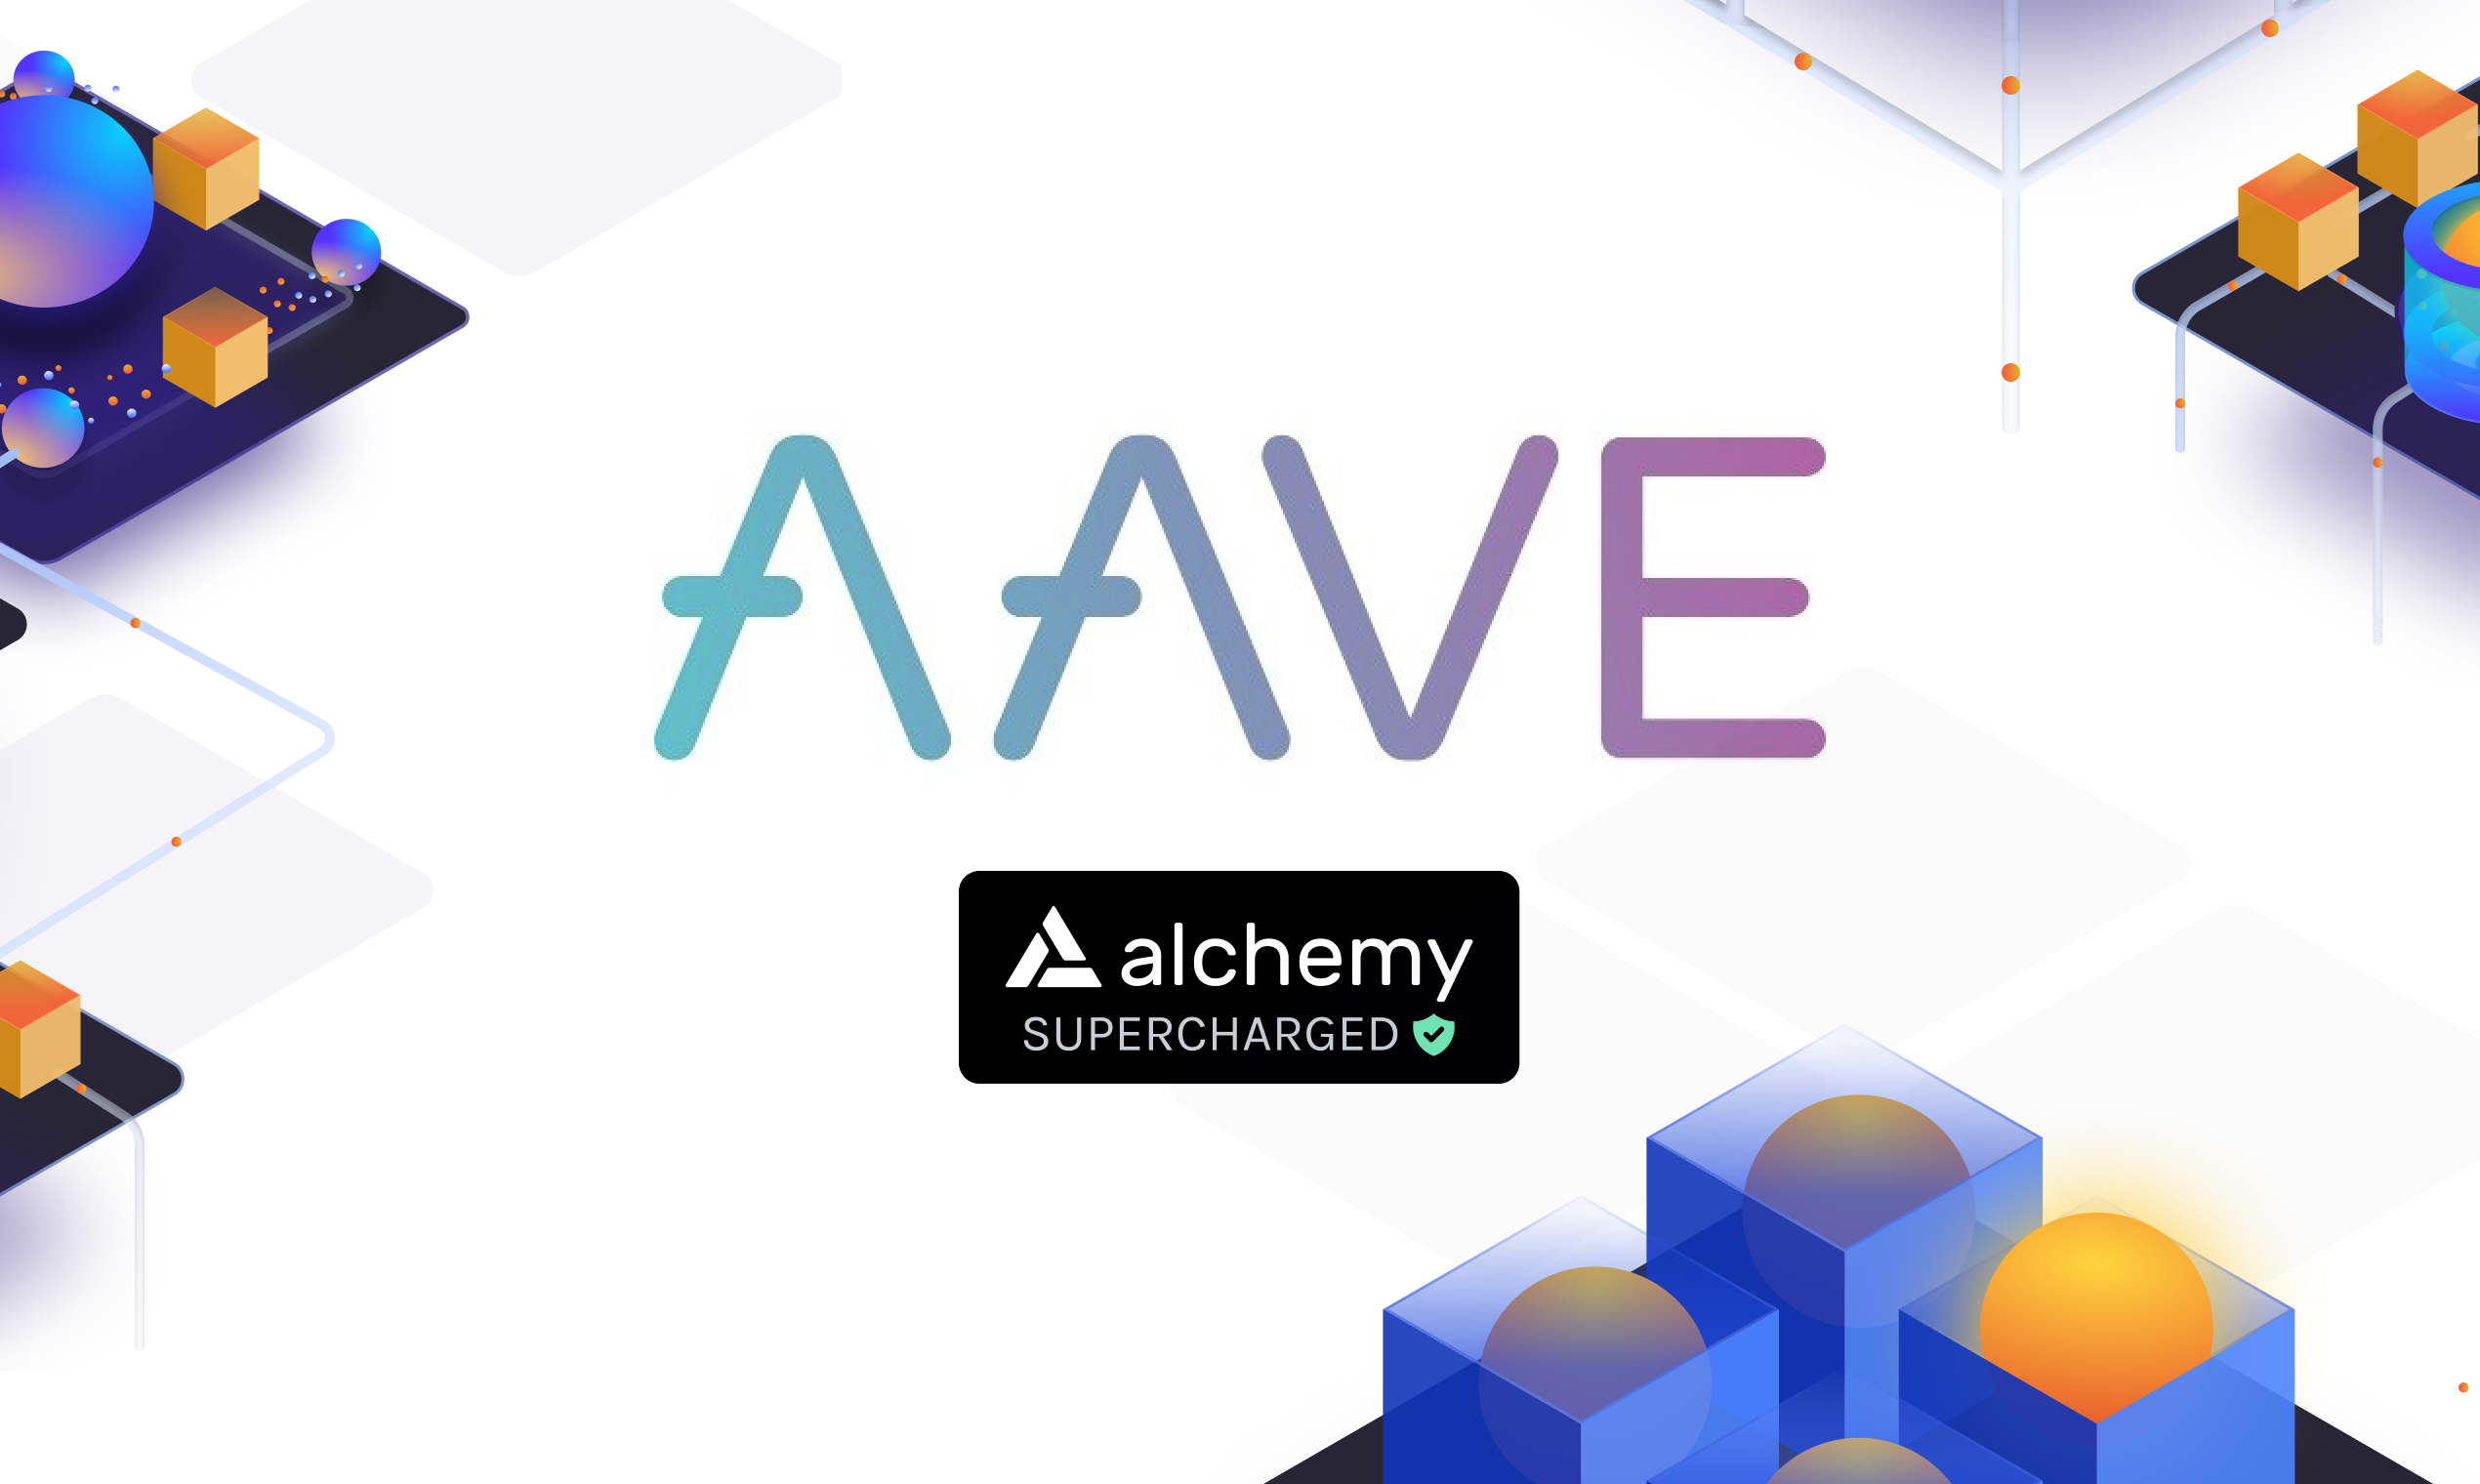 Aave alchemy poster.